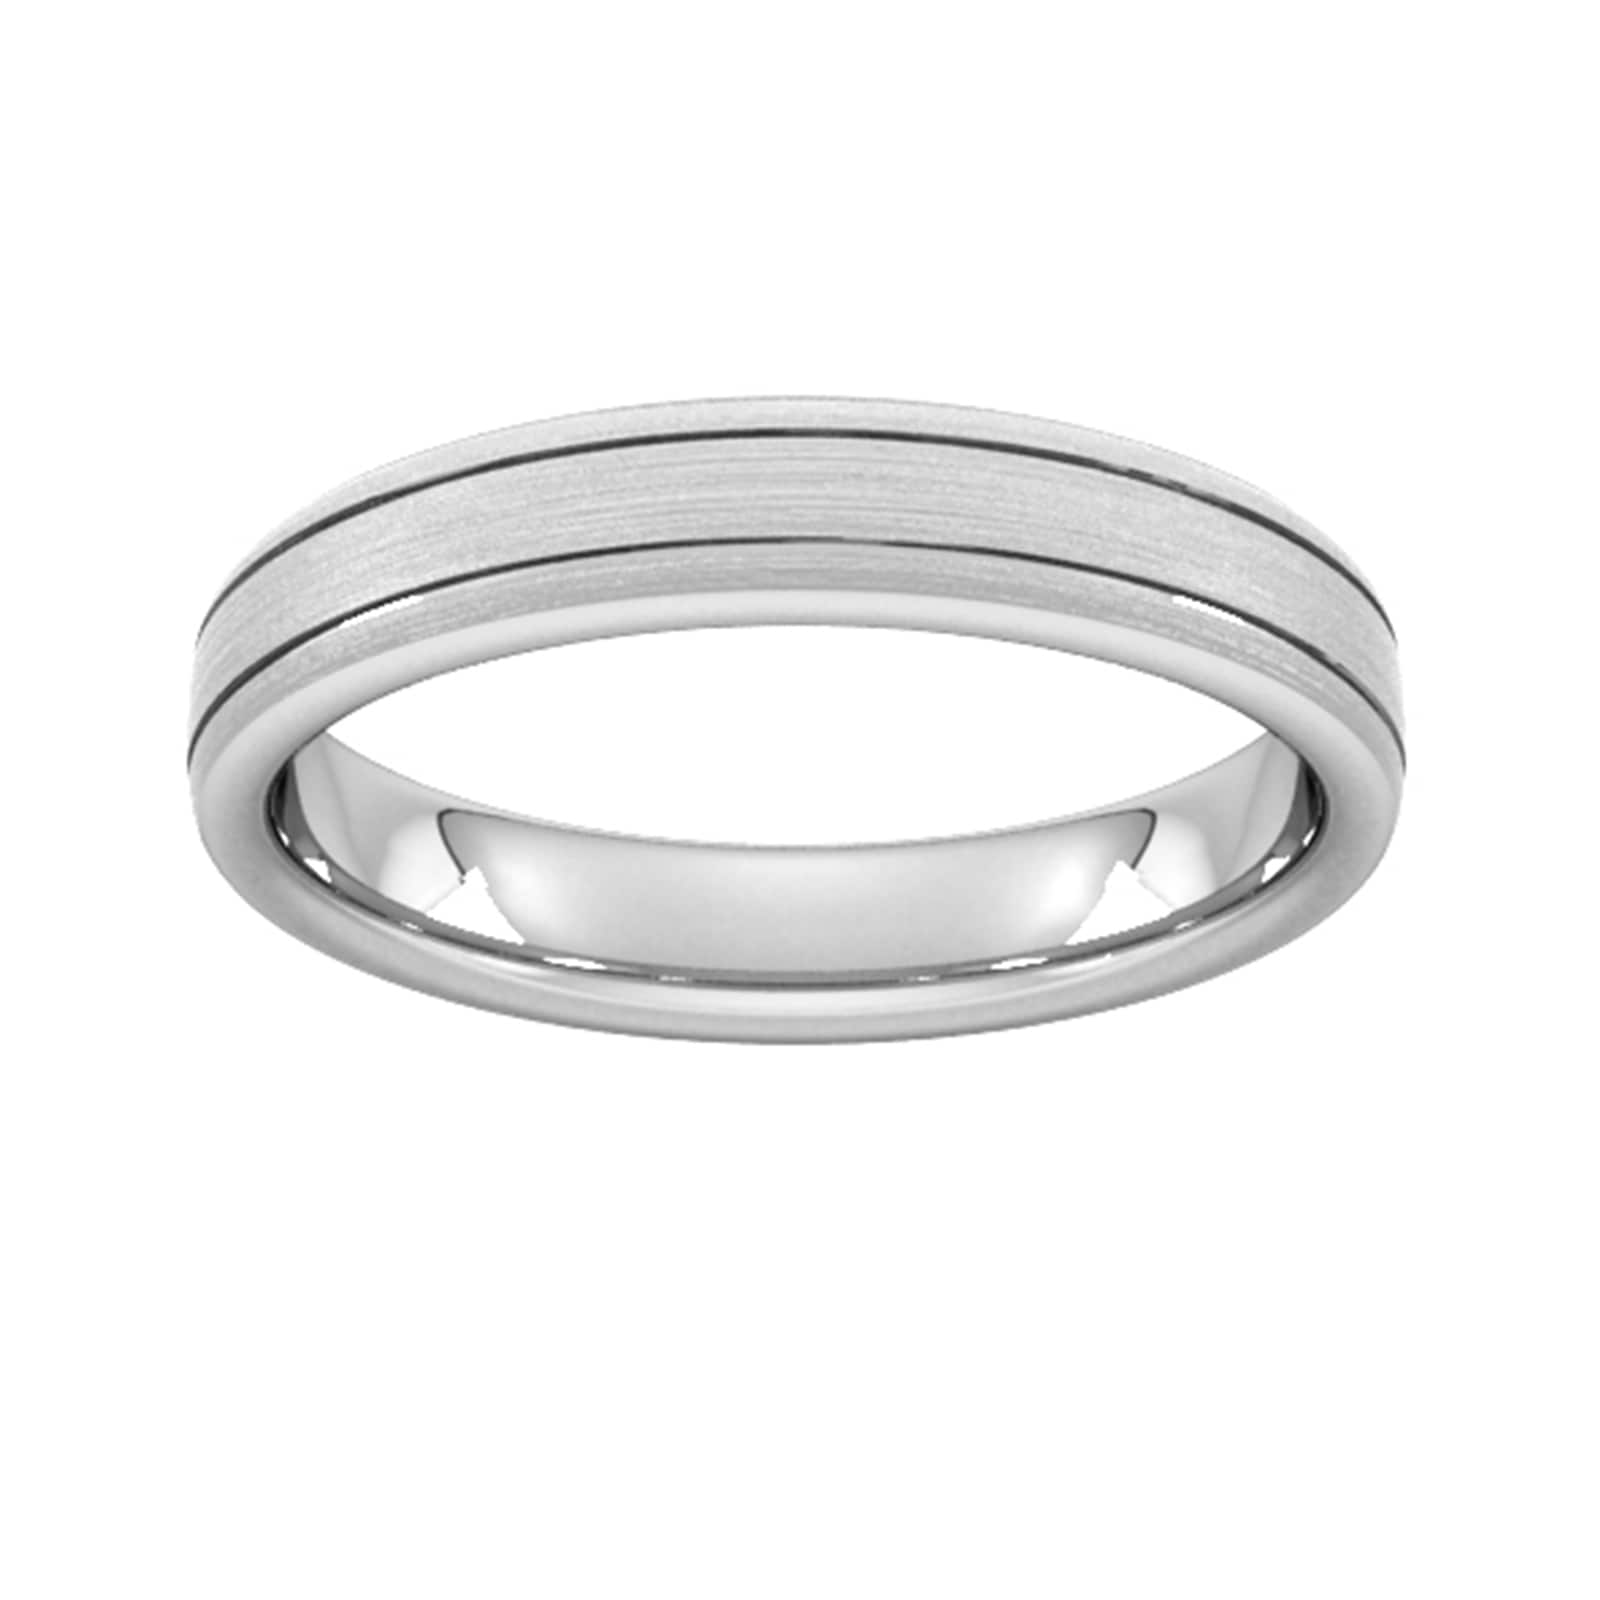 4mm Slight Court Heavy Matt Finish With Double Grooves Wedding Ring In 950 Palladium - Ring Size H